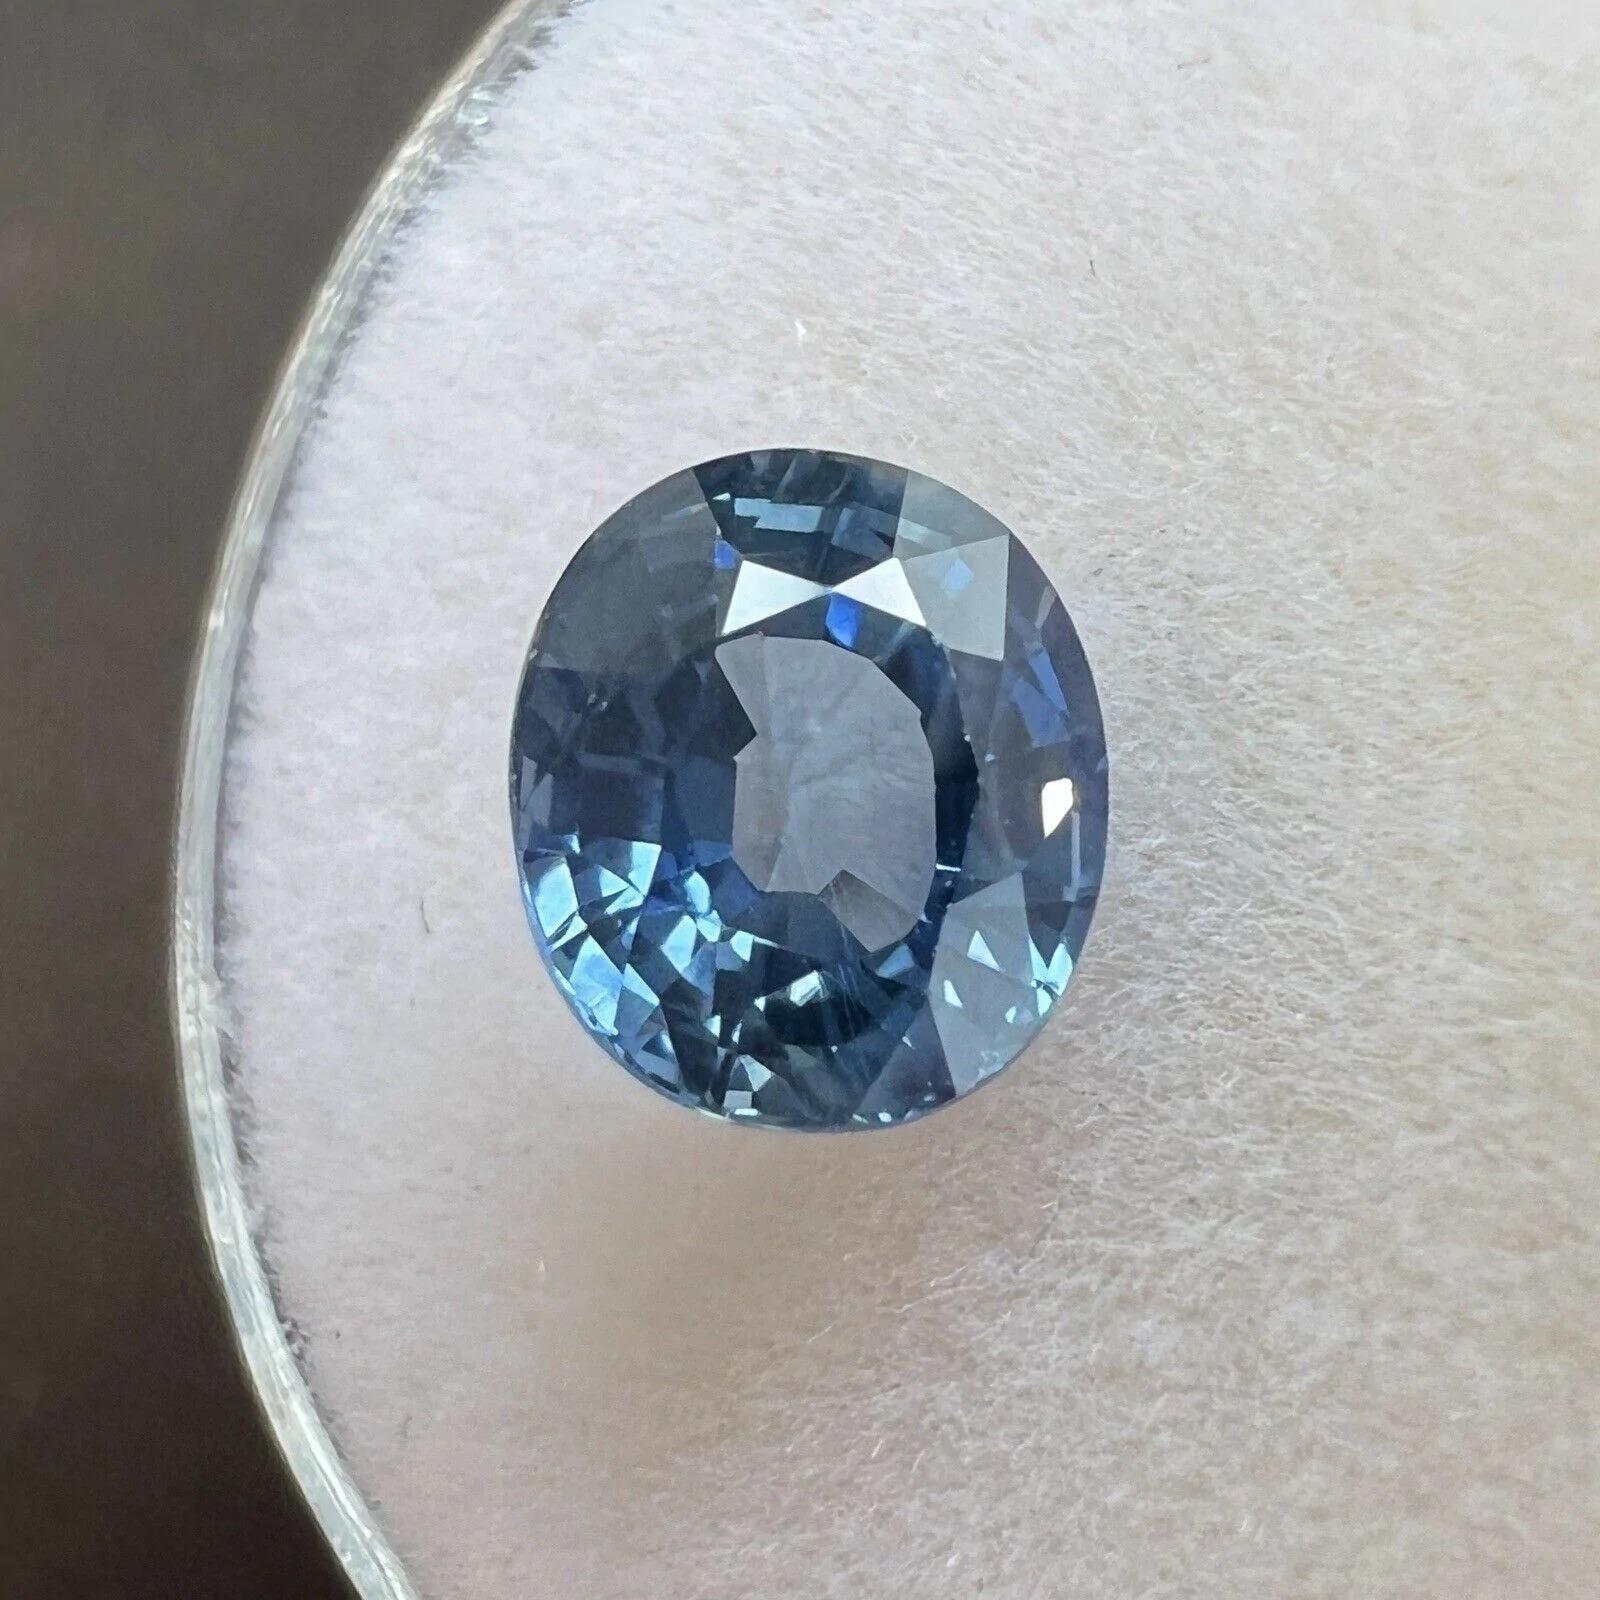 1.82ct AIG Certified Vivid Blue Sapphire Oval Cut Rare 7x6mm Loose Gemstone

AIG Certified Vivid Blue Sapphire Gemstone.
1.82 Carat sapphire with a beautiful vivid blue colour. Fully certified by AIG confirming stone as natural. Also has very good